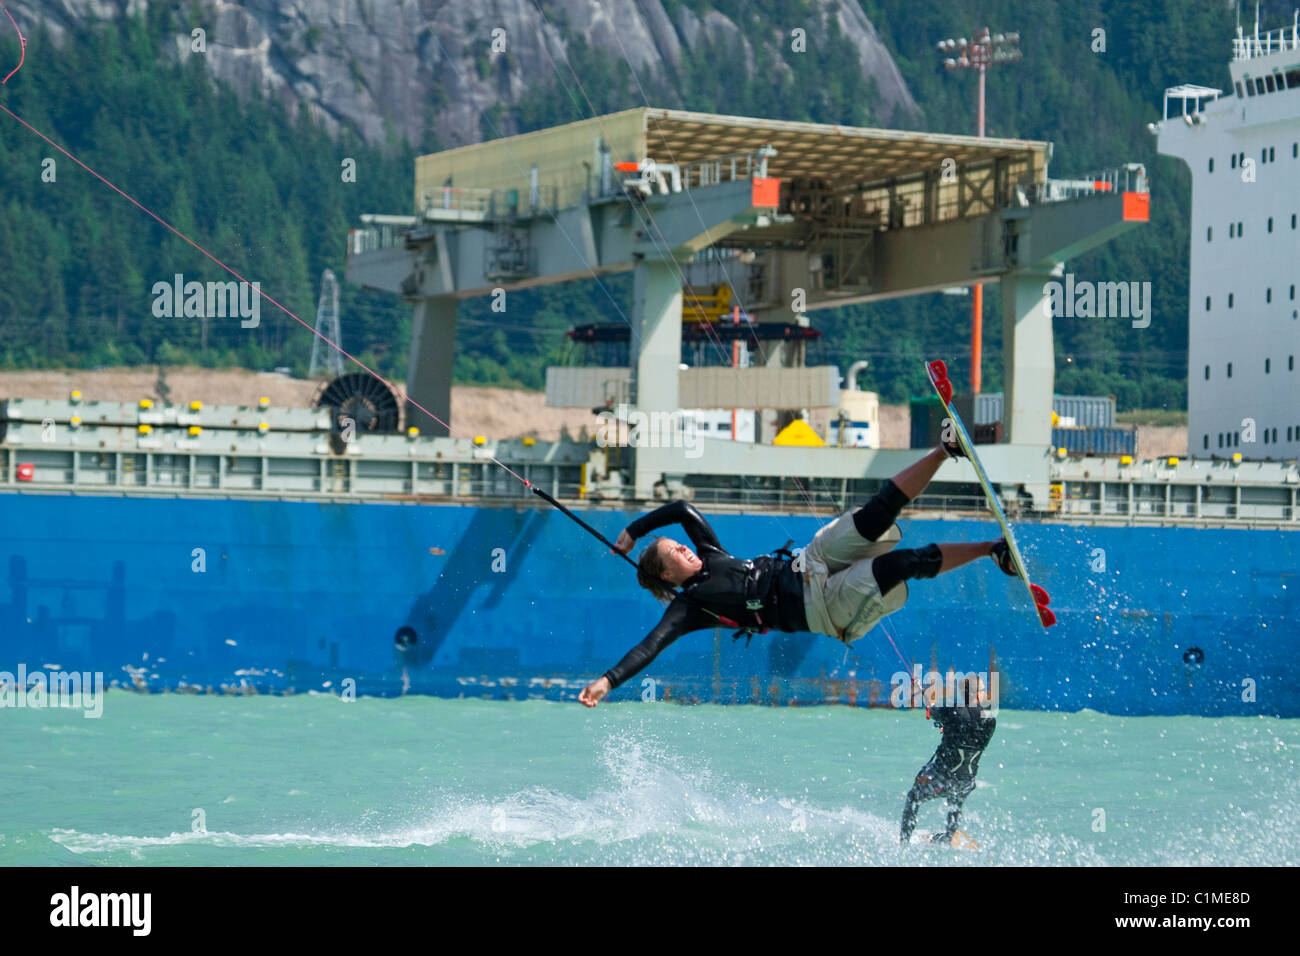 AIrborne kiteboarder at 'the Spit', Squamish, BC, Canada. Stock Photo